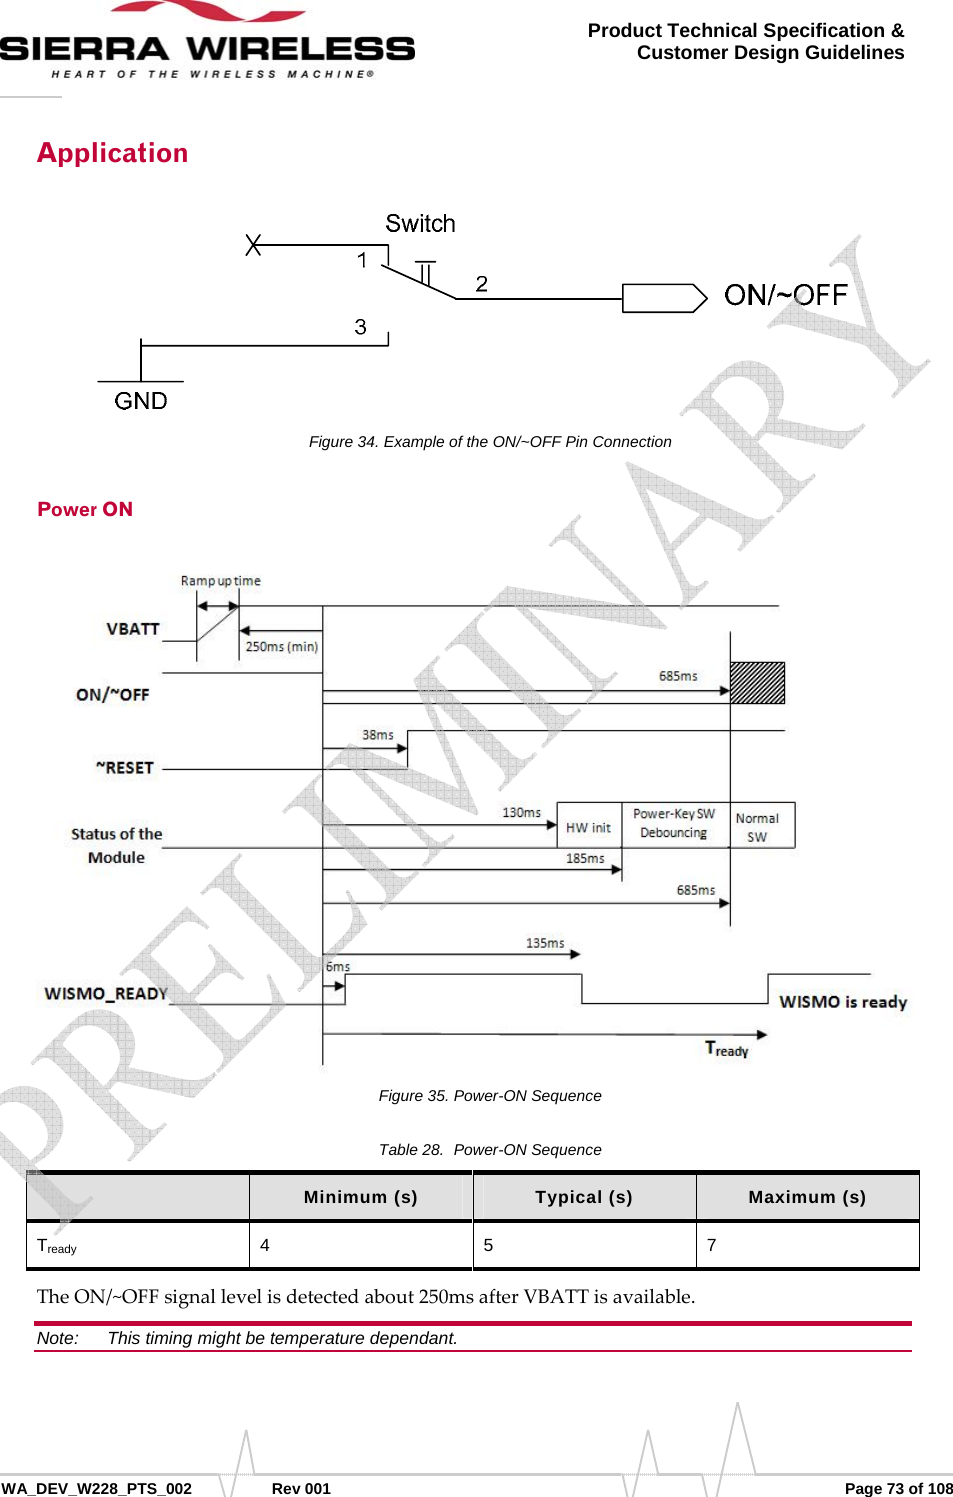      WA_DEV_W228_PTS_002 Rev 001  Page 73 of 108 Product Technical Specification &amp; Customer Design Guidelines Application Figure 34. Example of the ON/~OFF Pin Connection Power ON Figure 35. Power-ON Sequence Table 28.  Power-ON Sequence  Minimum (s)  Typical (s)  Maximum (s) Tready 4 5 7 TheON/~OFFsignallevelisdetectedabout250msafterVBATTisavailable.Note:   This timing might be temperature dependant.    